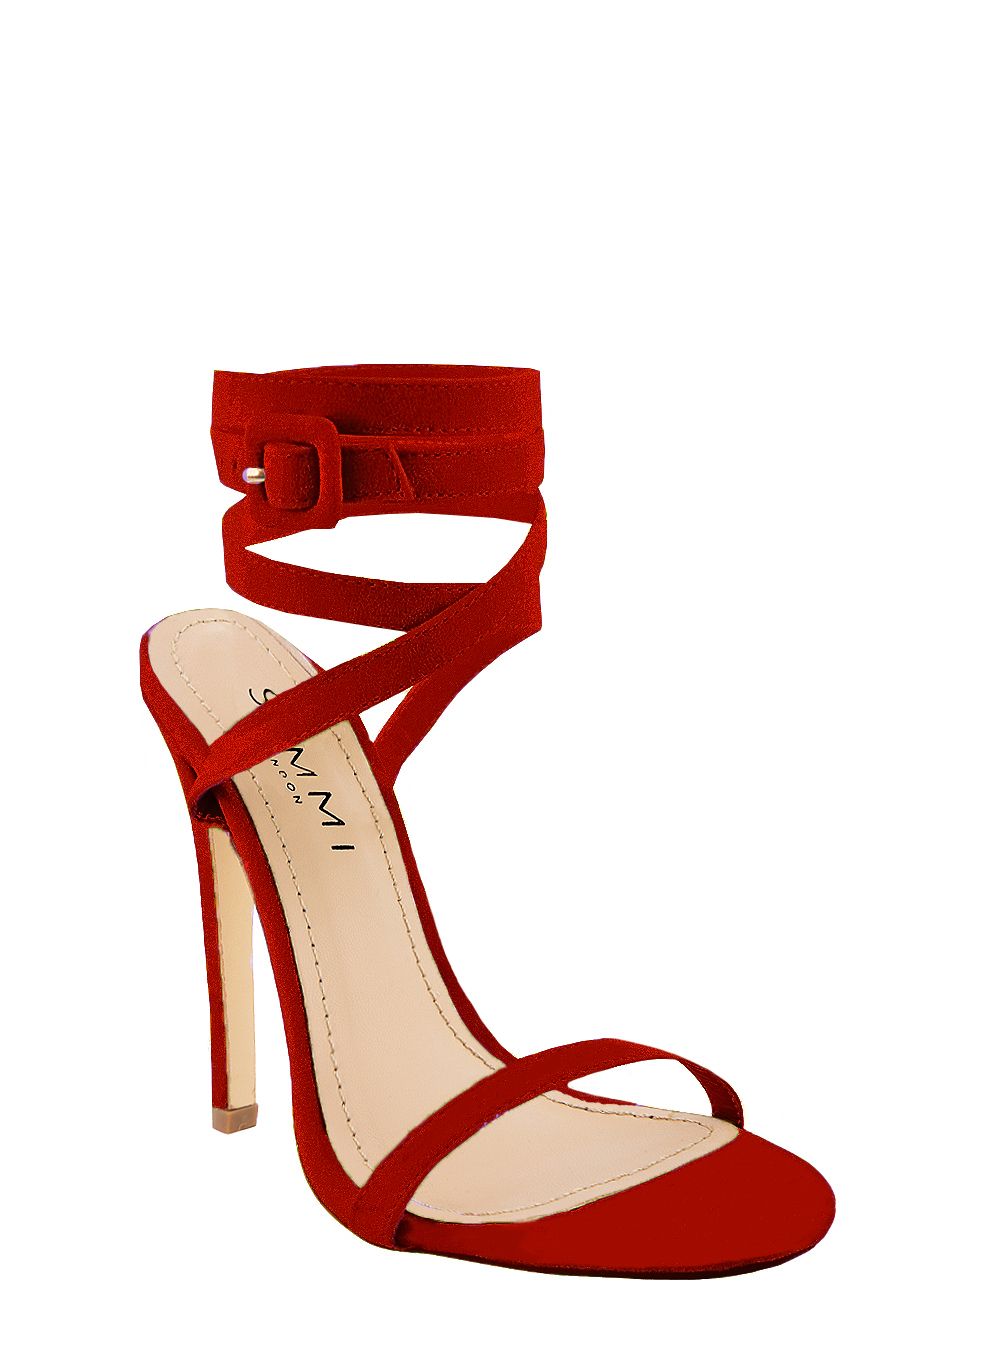 Talia Red Suede Lace Up Stiletto Heels